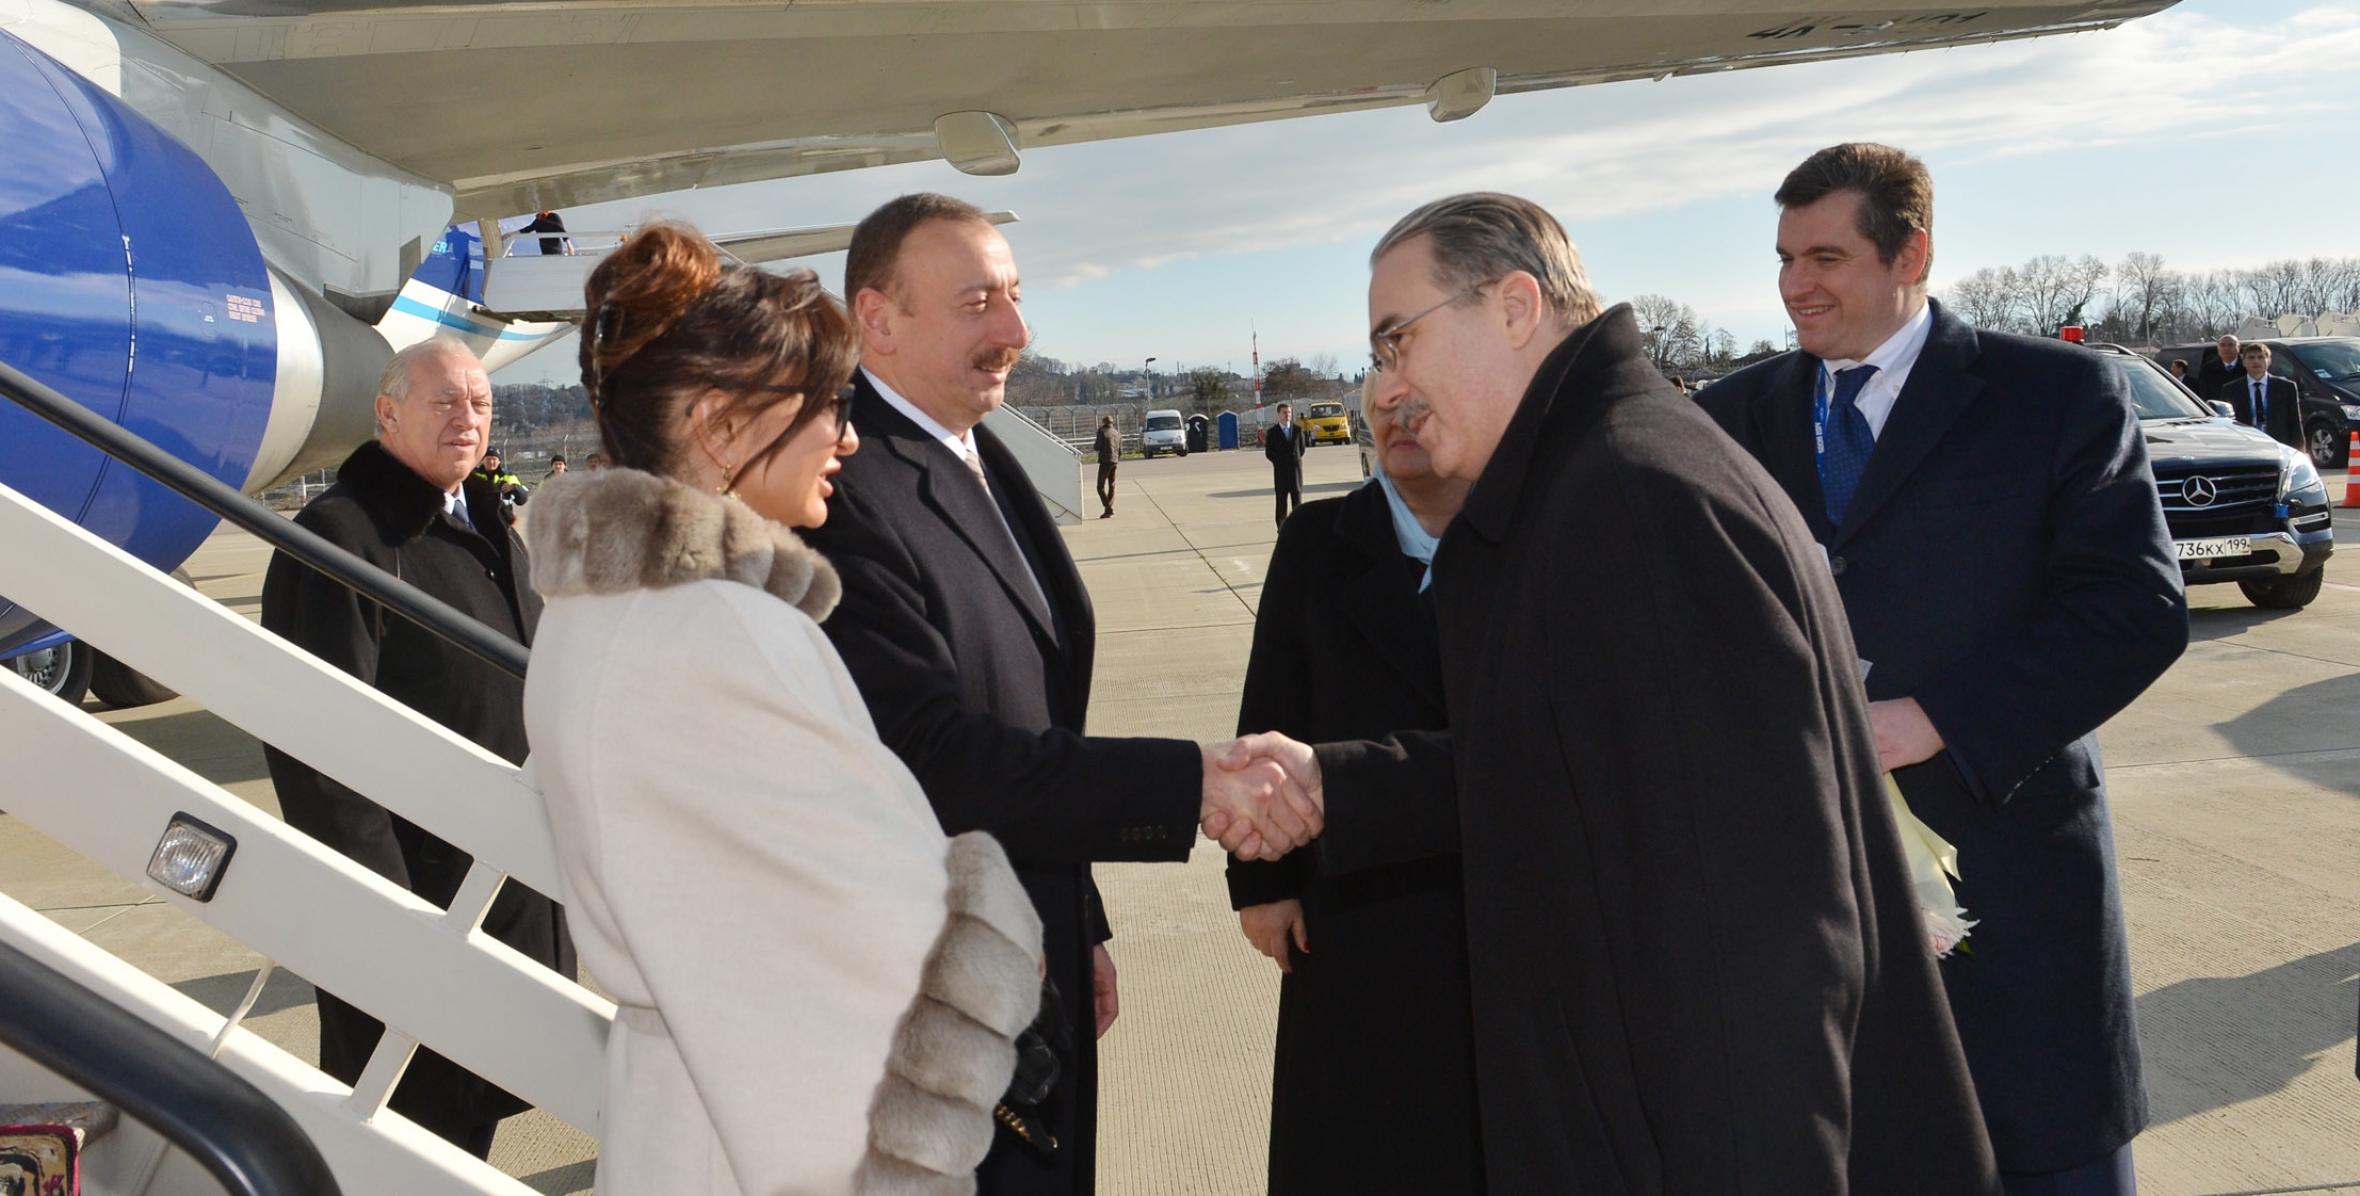 Ilham Aliyev arrived in the Russian Federation on a working visit